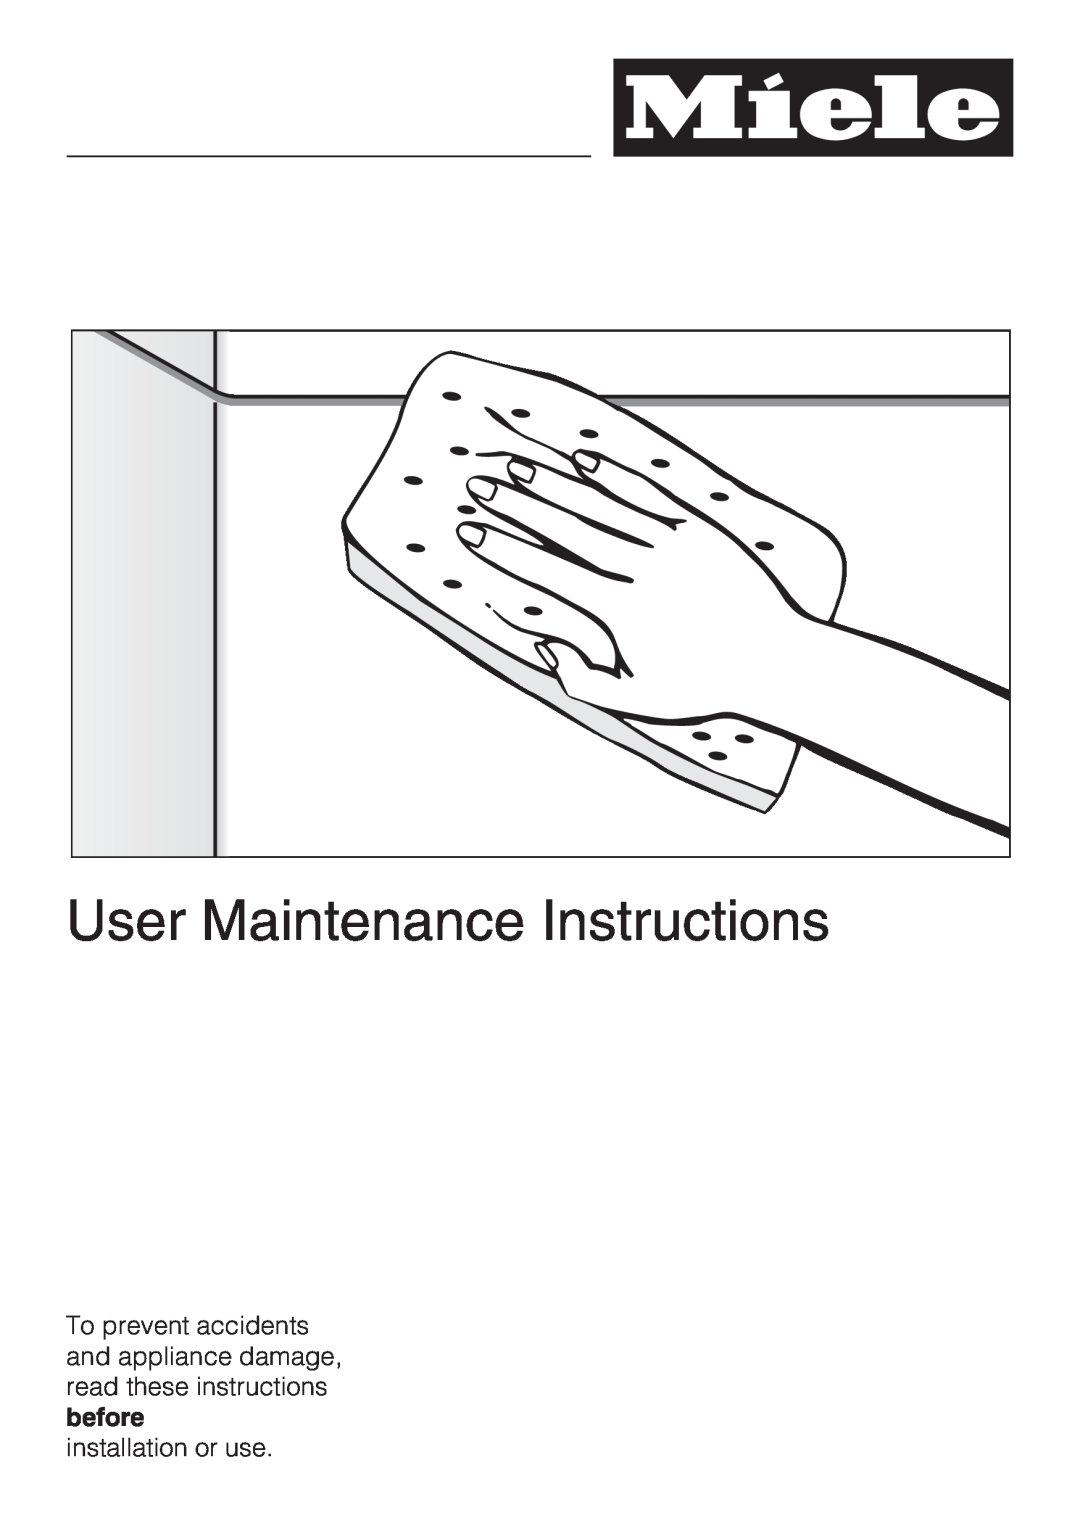 Miele G 2872 operating instructions User Maintenance Instructions, installation or use 